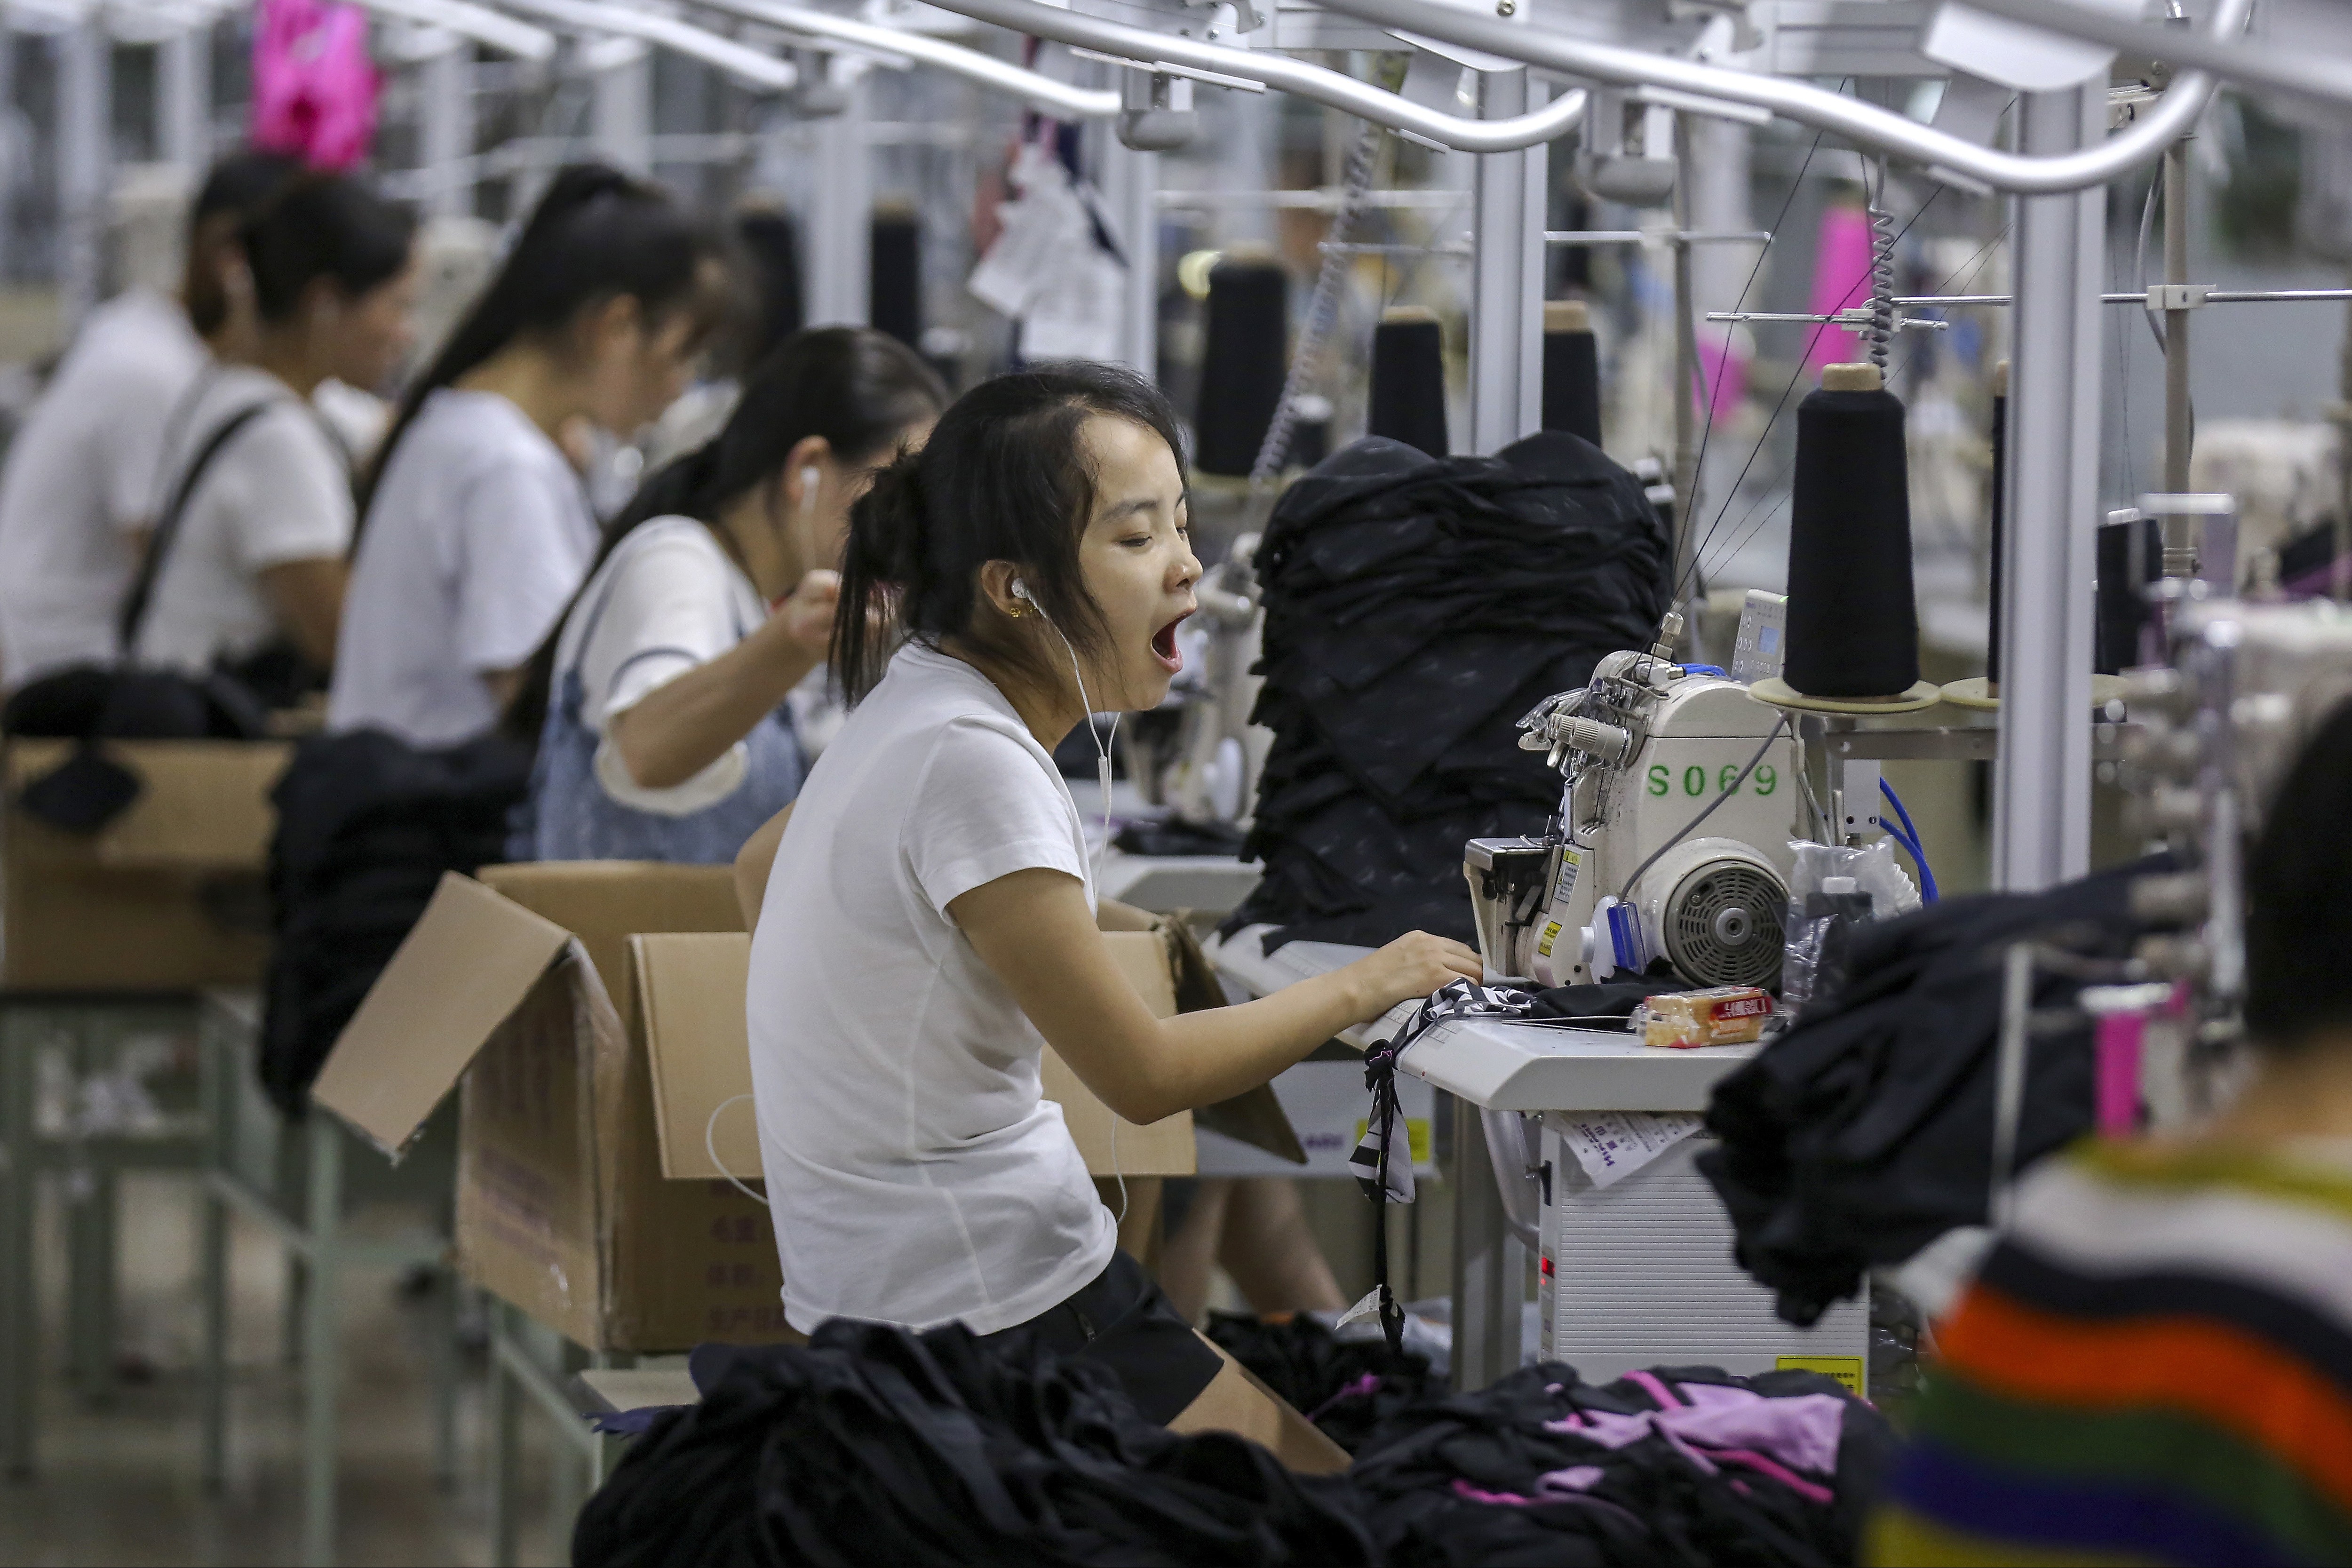 Workers sew swimsuits at a factory in Jinjiang city, Fujian province, this month. The Chinese economy is unmistakably slowing, but the slowdown this year – a result of policies aimed at ensuring financial stability and a natural rollover in momentum after a strong 2017 – is mild. Photo: Chinatopix via AP